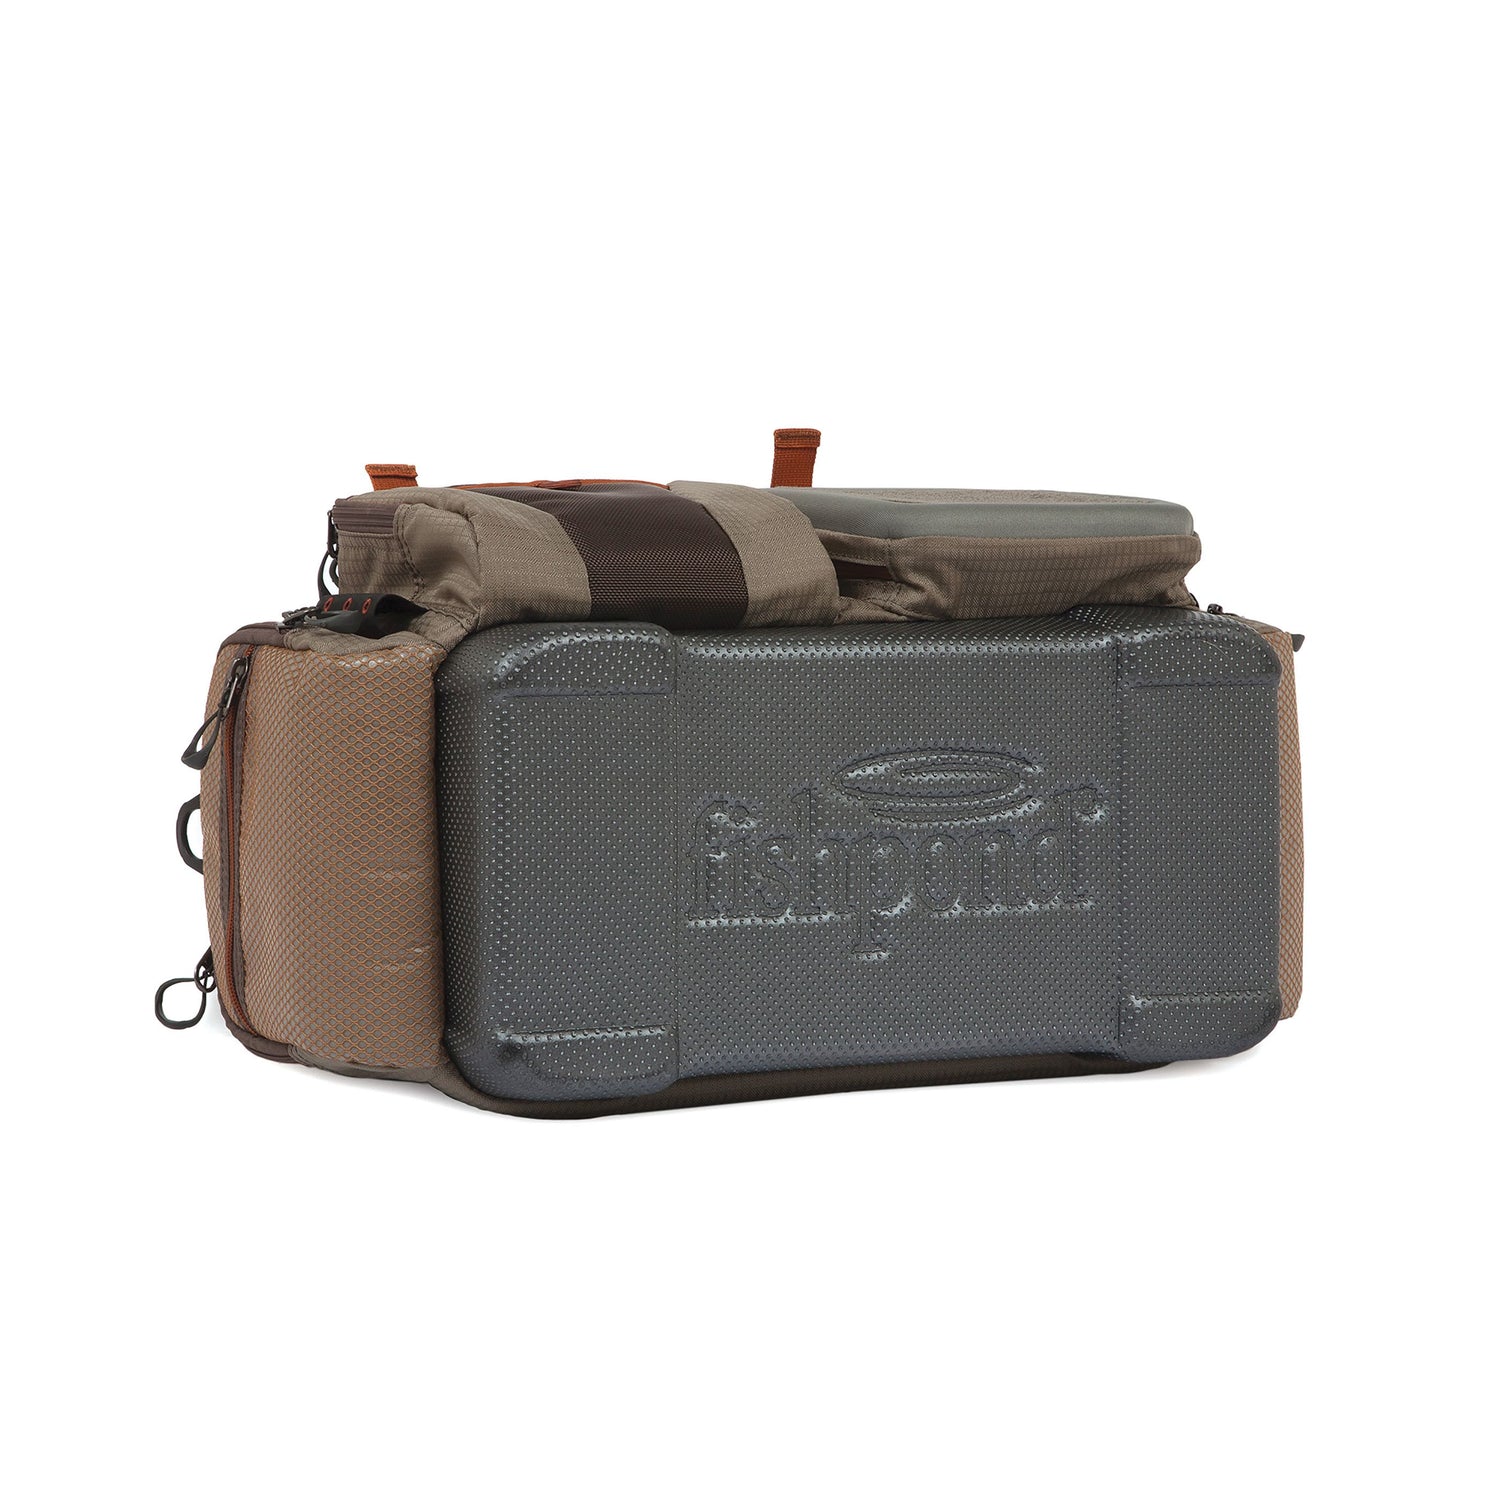 Green River Gear Bag  Fly Fishing – Fishpond